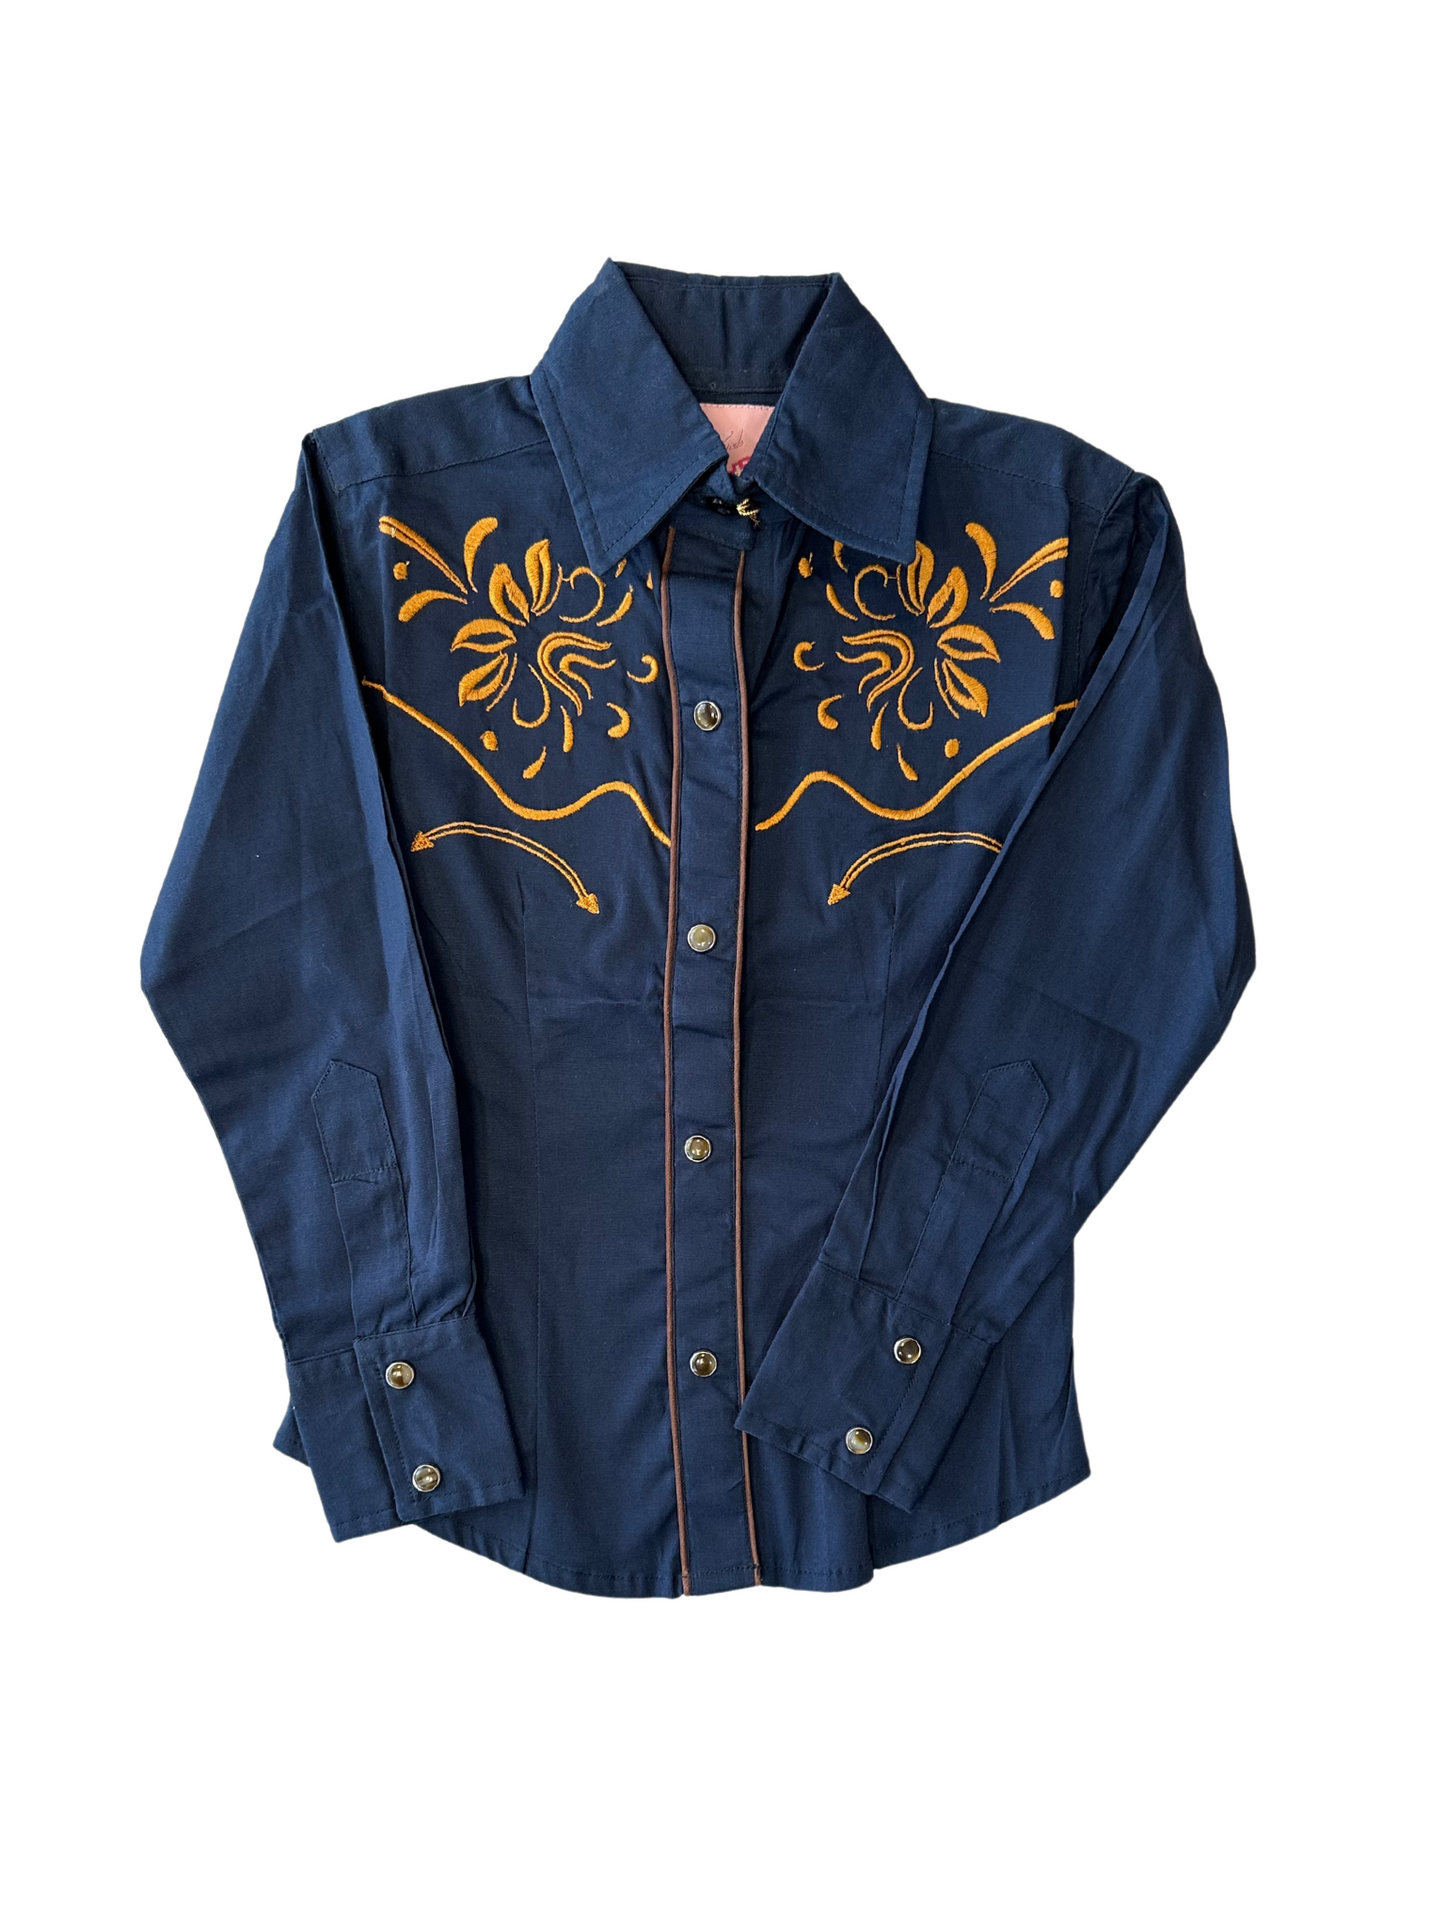 Girl's Floral Embroided Button Down Shirt - Navy